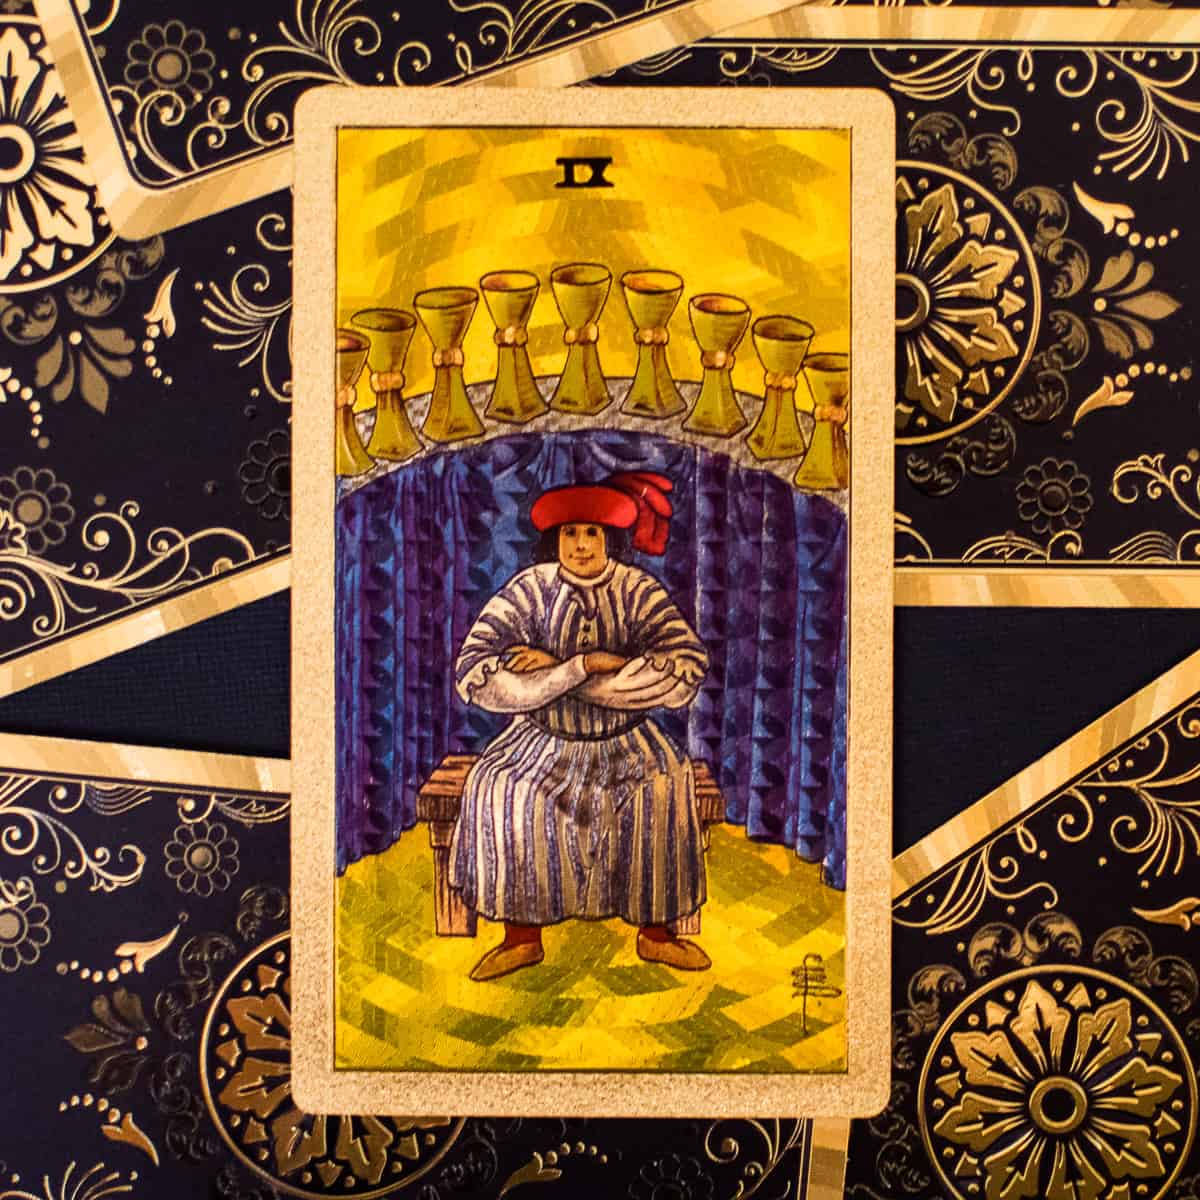 9 cups arched over a mans head depicted on a tarot card.